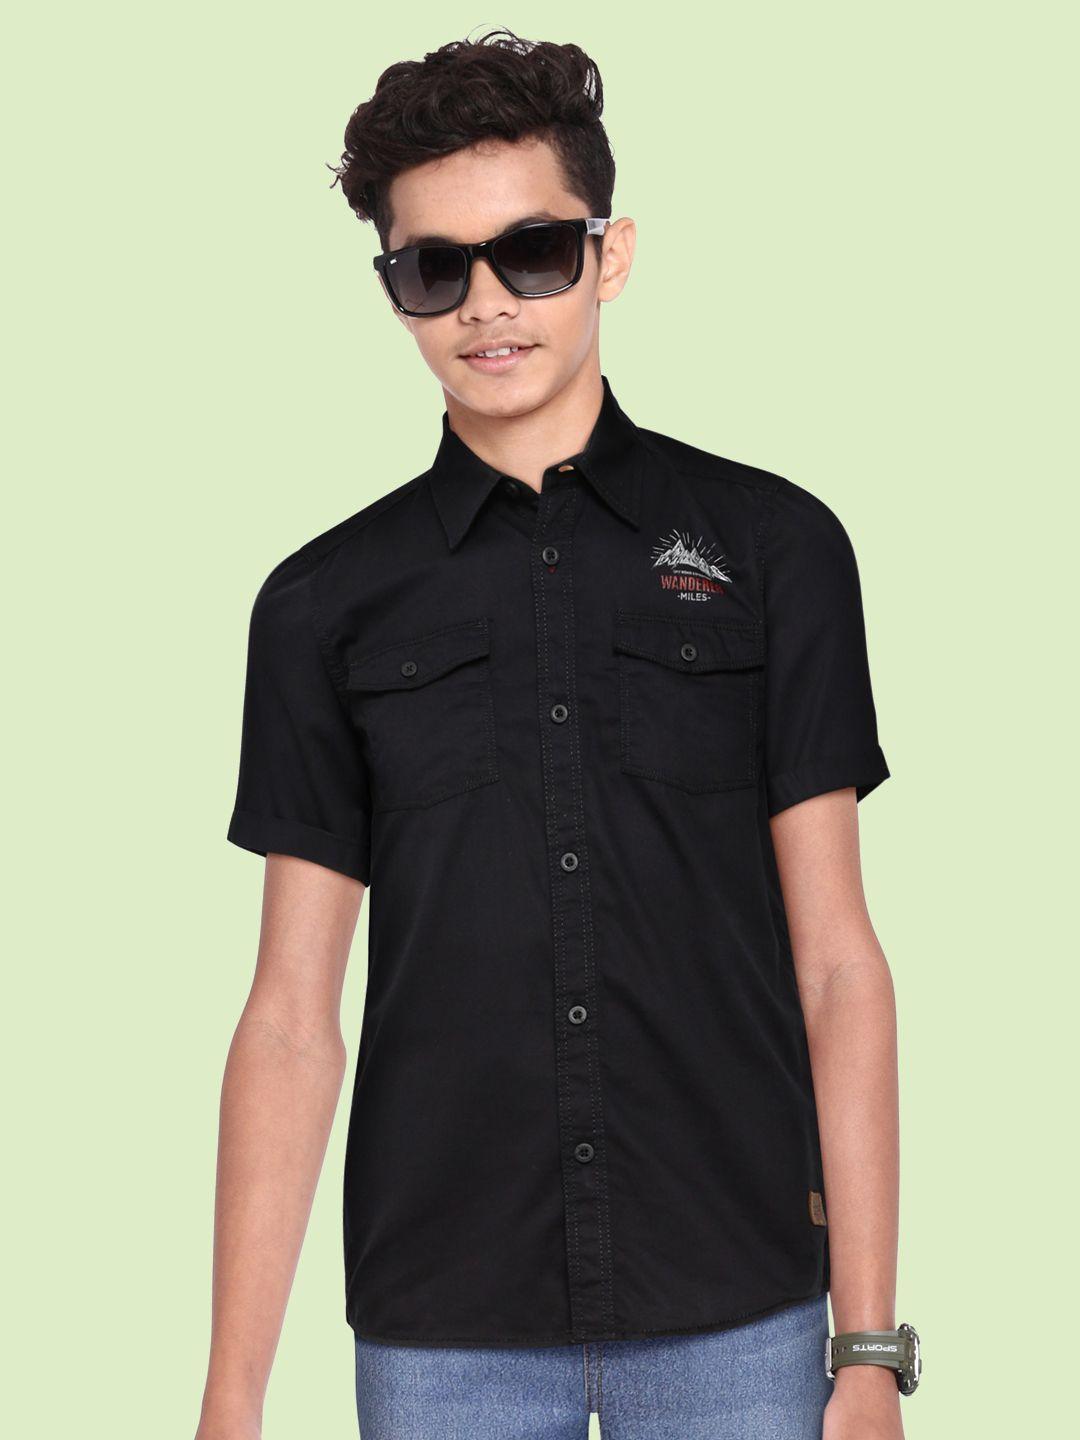 uth-by-roadster-boys-black-printed-casual-shirt